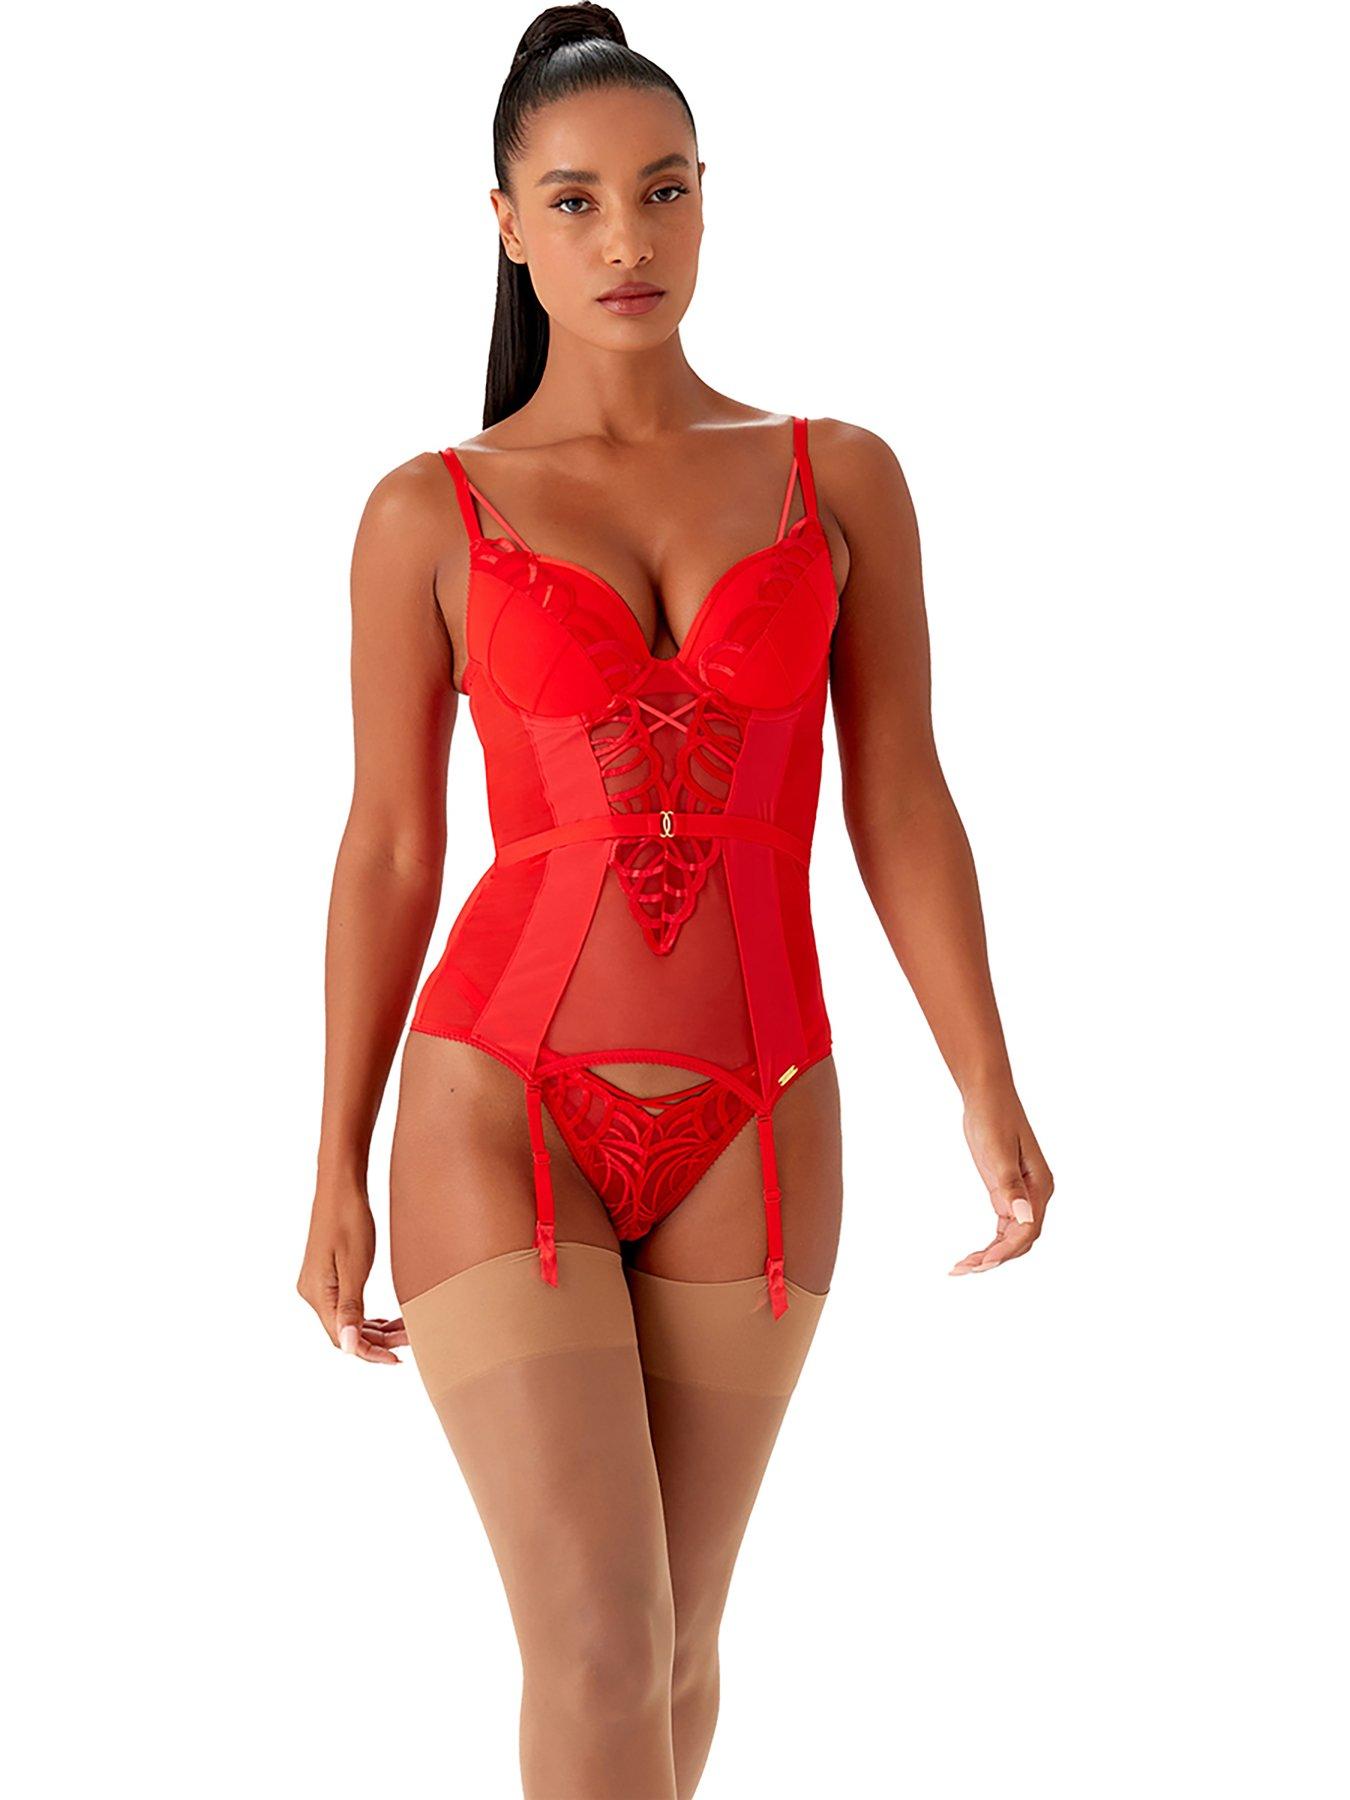 Women's Entice Diamante Strap Corset in Black or Red (£5.40 with